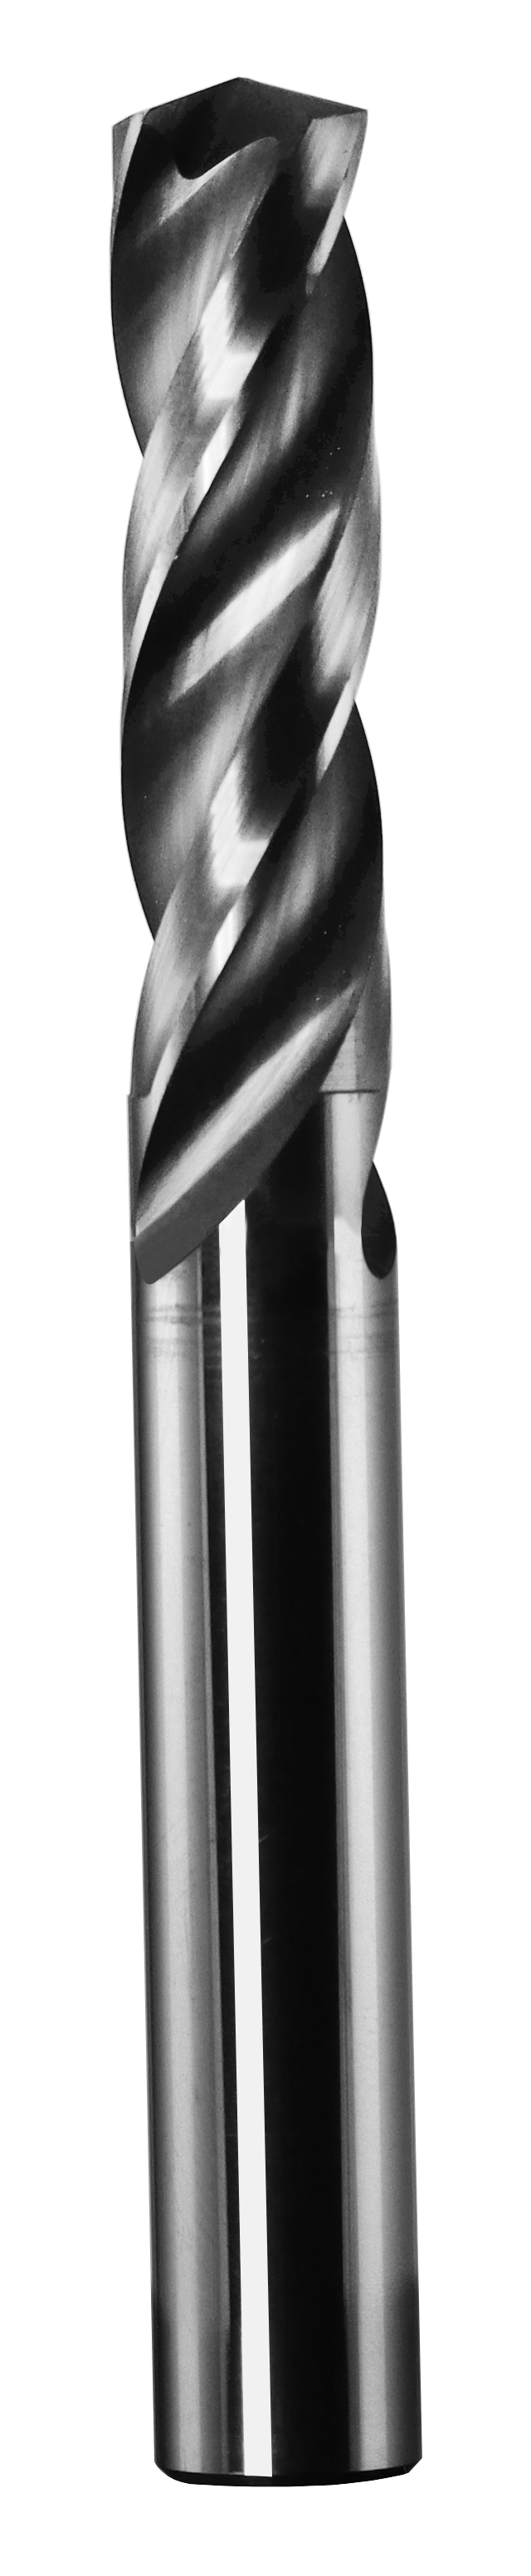 10.00mm Dia, 150 Degree Point, Solid Carbide Drill - 63026